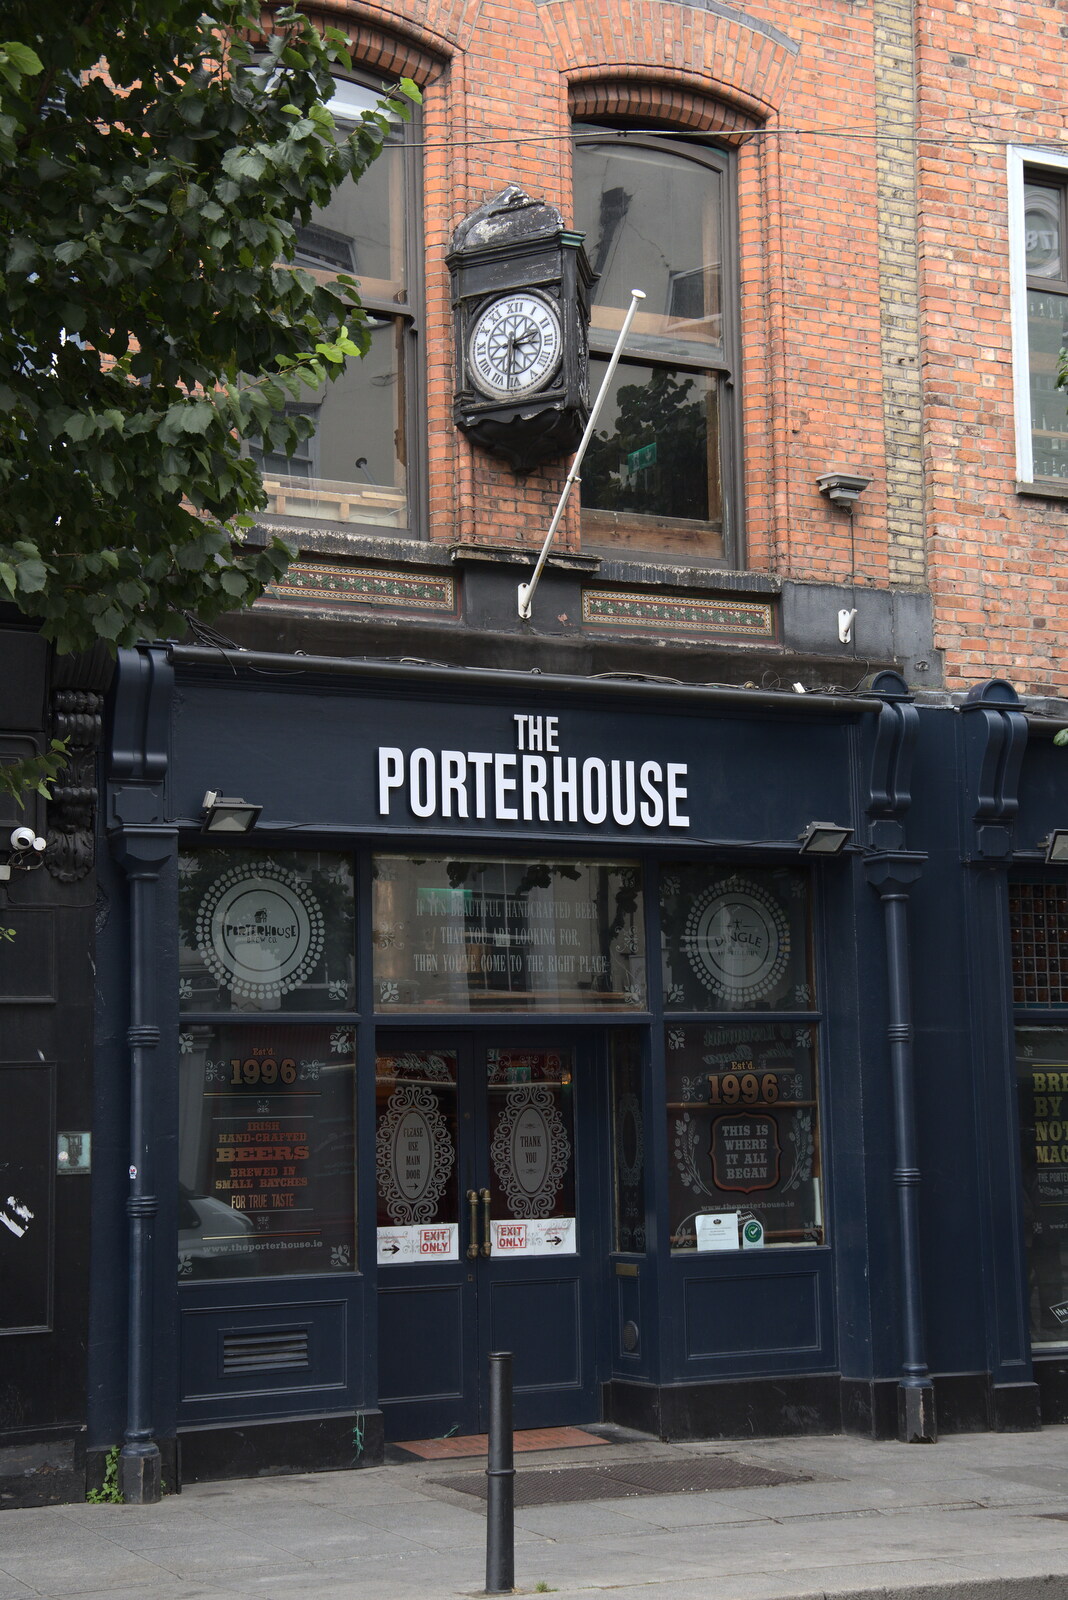 The Porterhouse on Parliament Street from A Trip to Noddy's, and Dublin City Centre, Wicklow and Dublin, Ireland - 16th August 2021